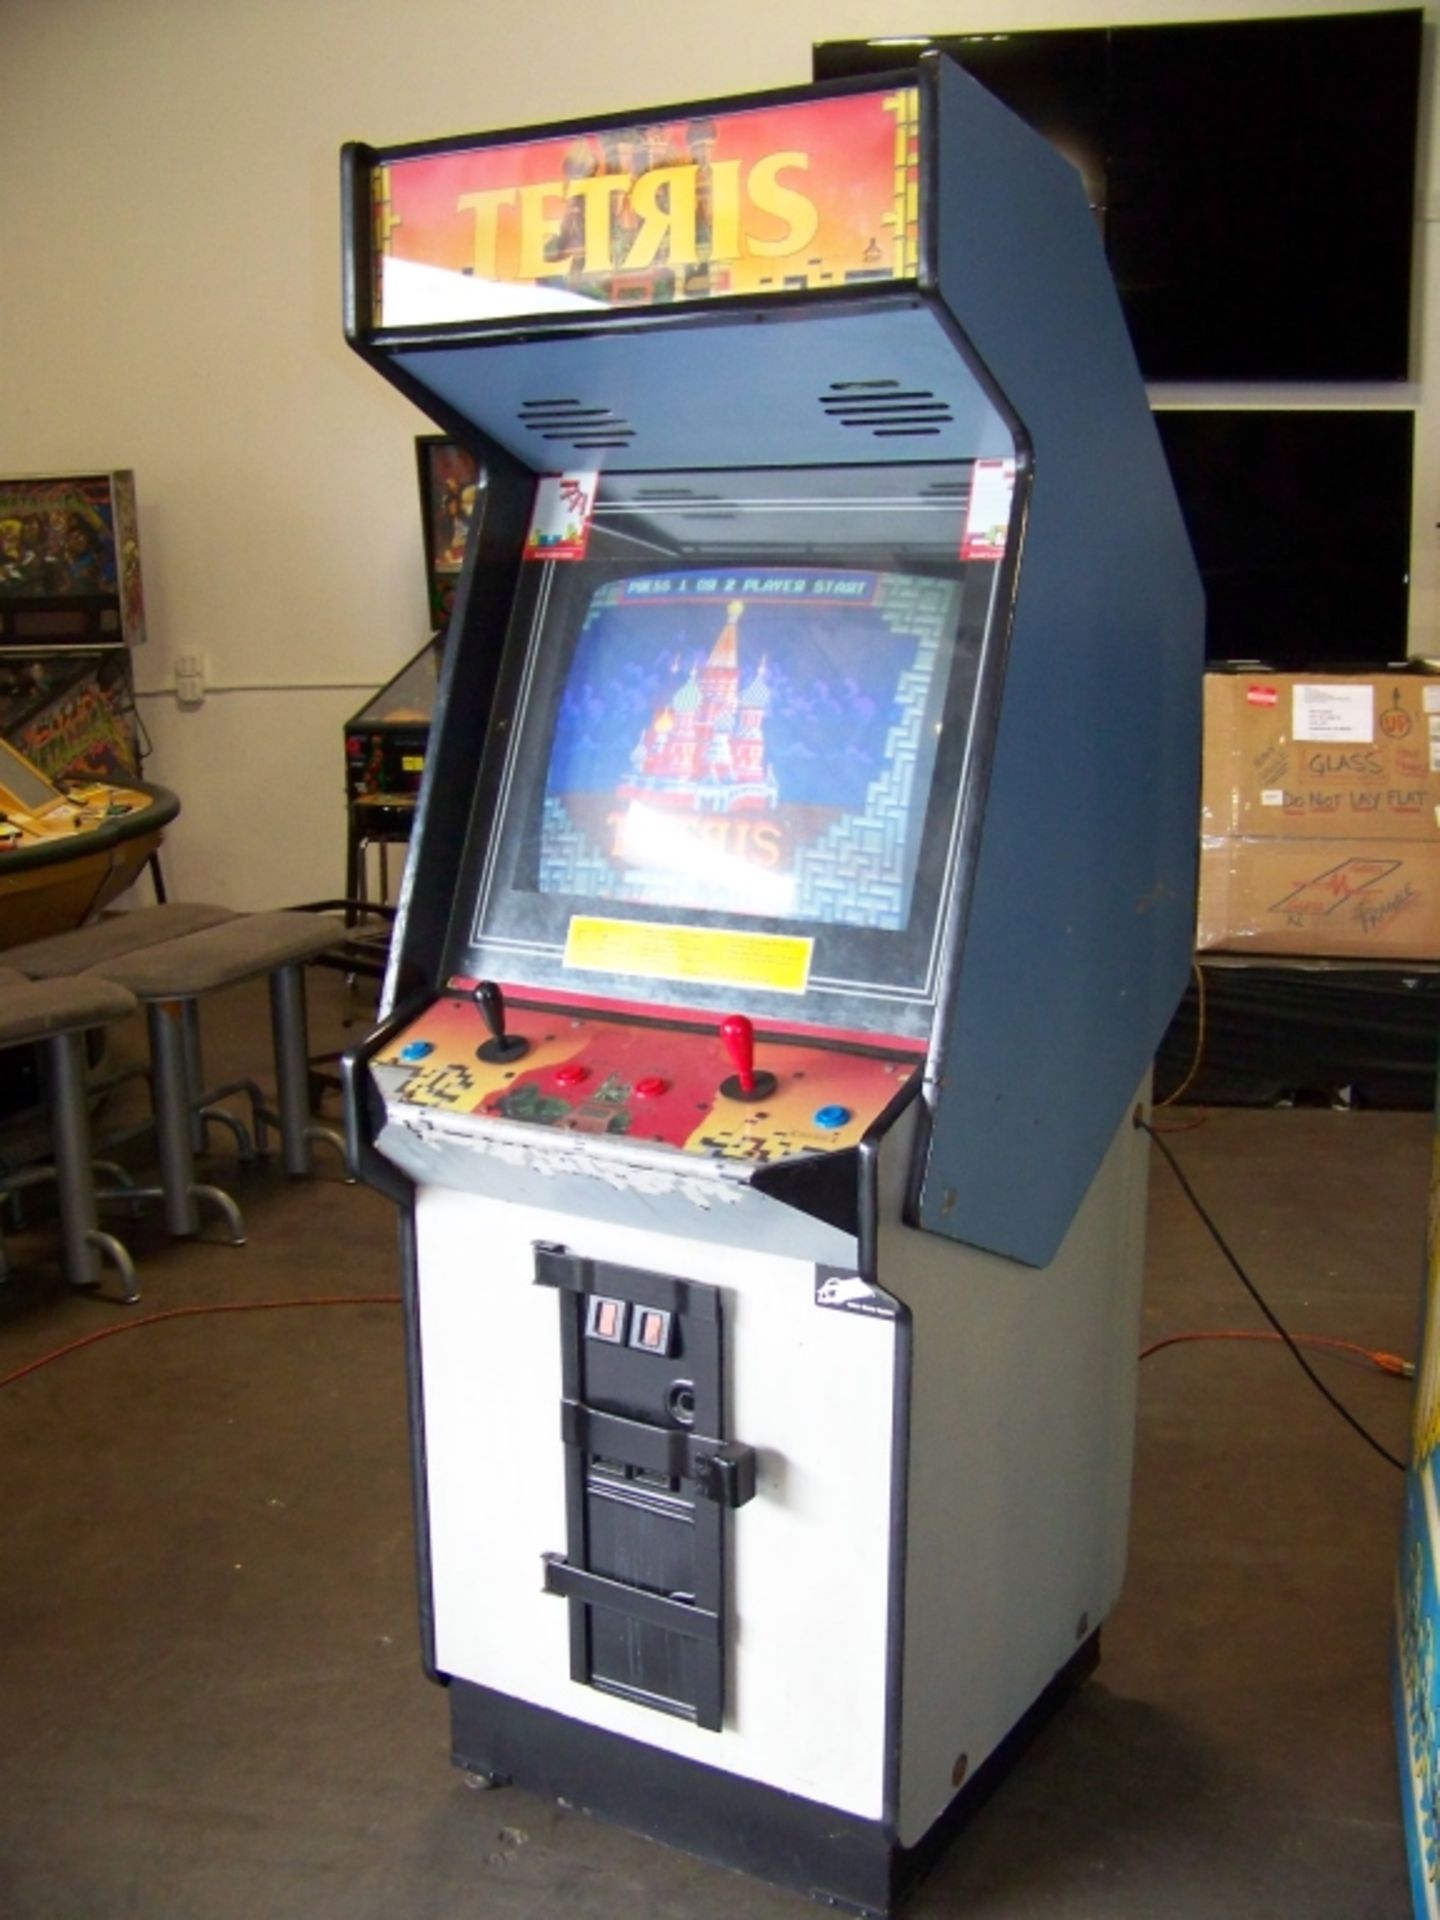 TETRIS CLASSIC UPRIGHT ARCADE GAME ATARI Item is in used condition. Evidence of wear and - Image 3 of 3